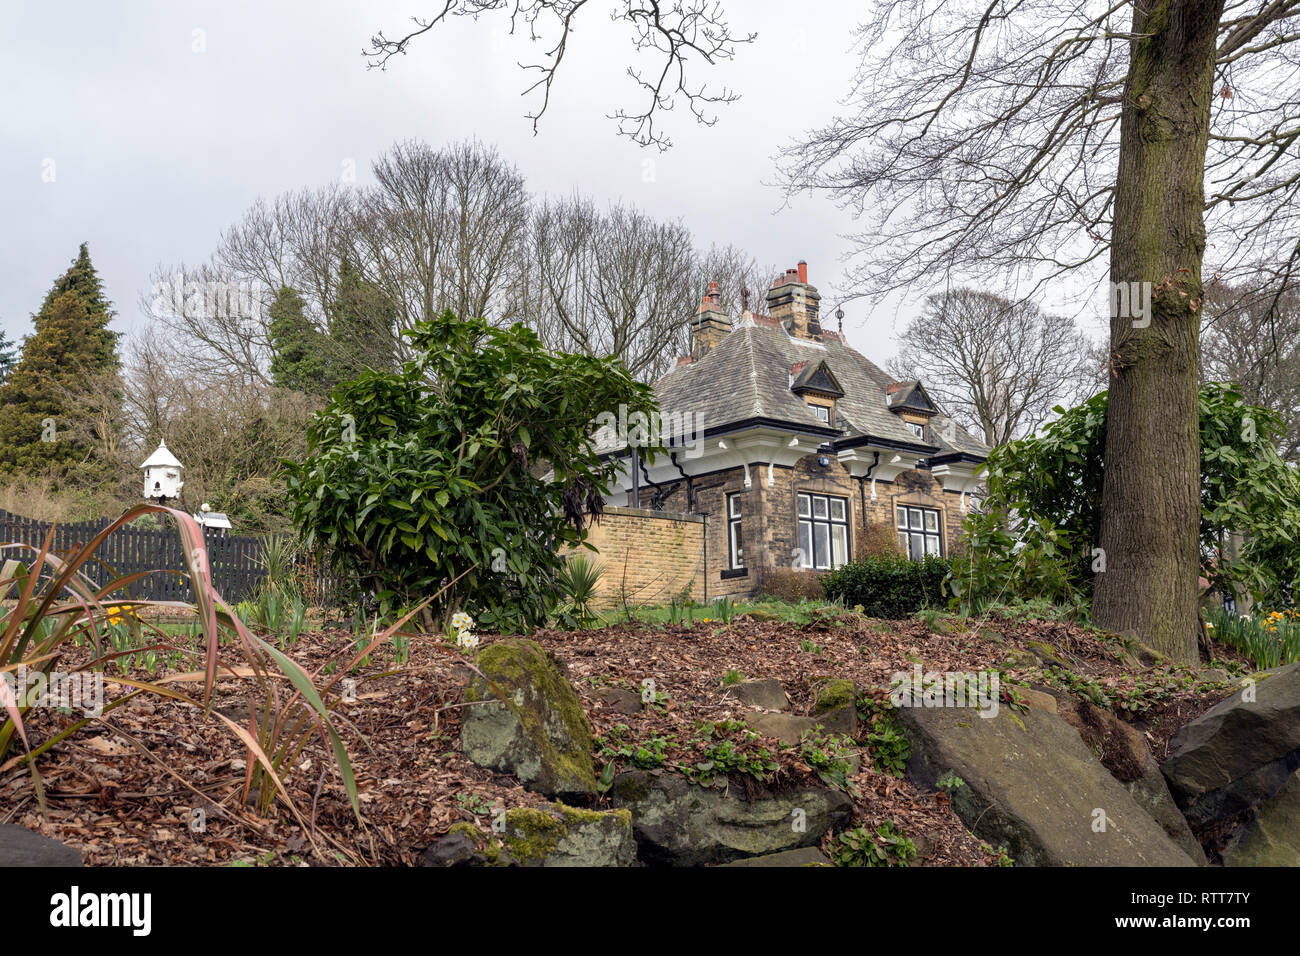 The Lodge, Beaumont Park, Huddersfield Stock Photo